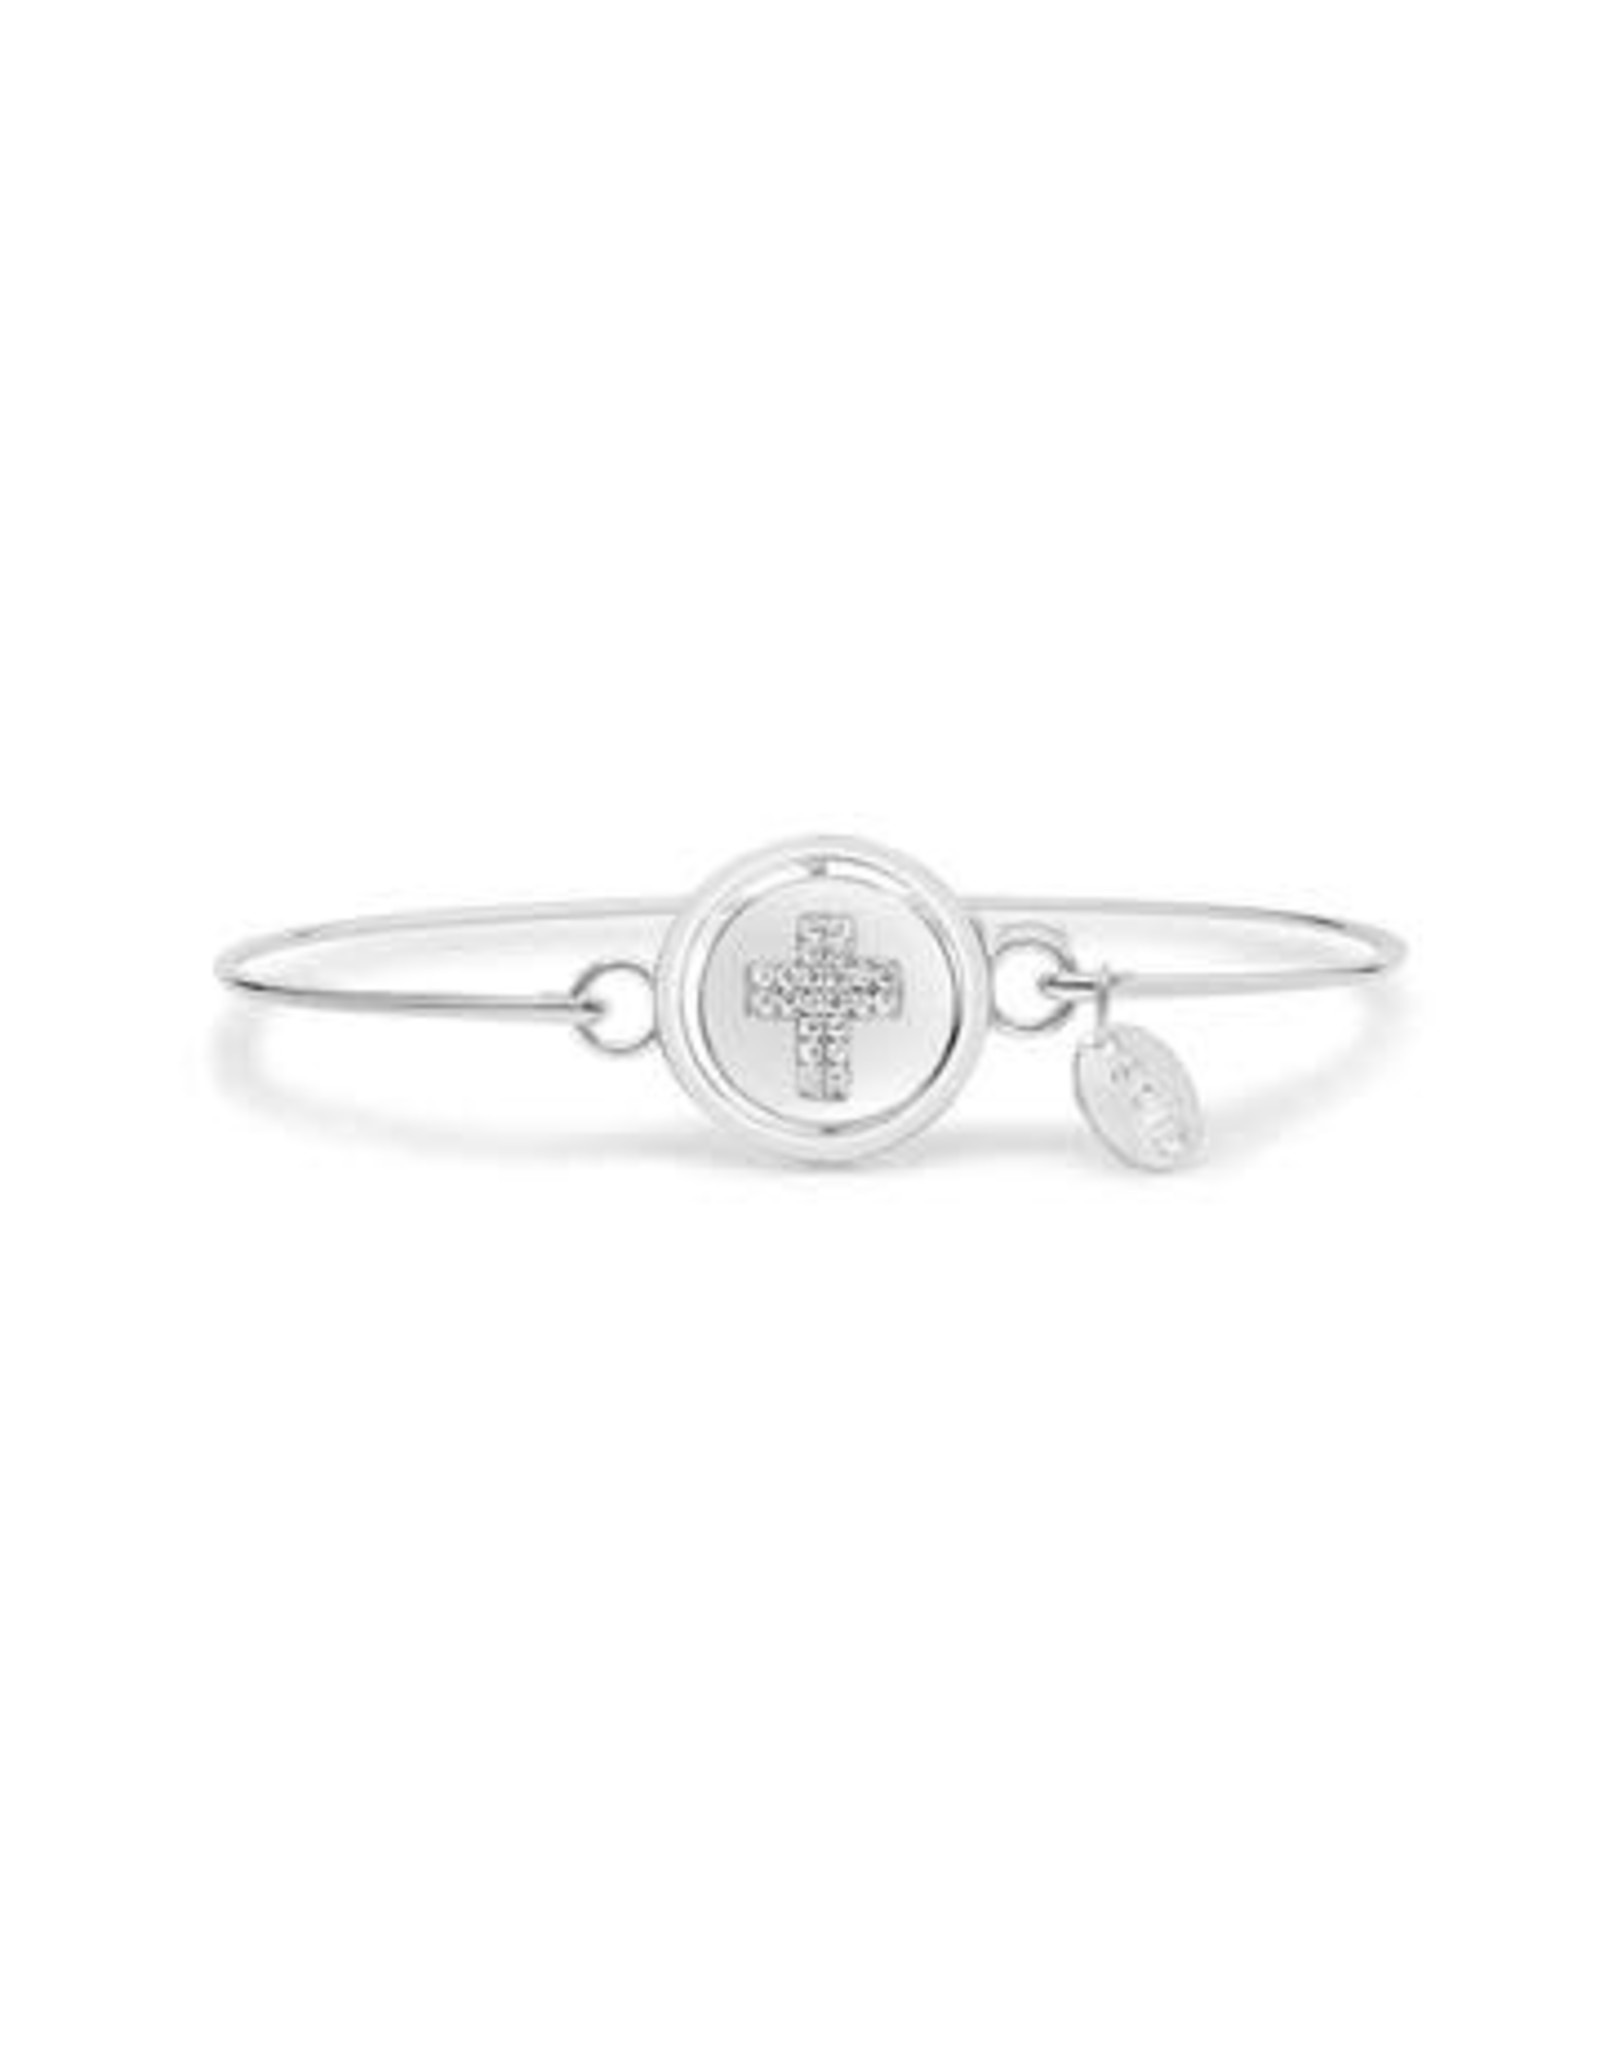 STIA COUTURE 060-SS-137   PAVE CROSS SPINNING CHARM BR